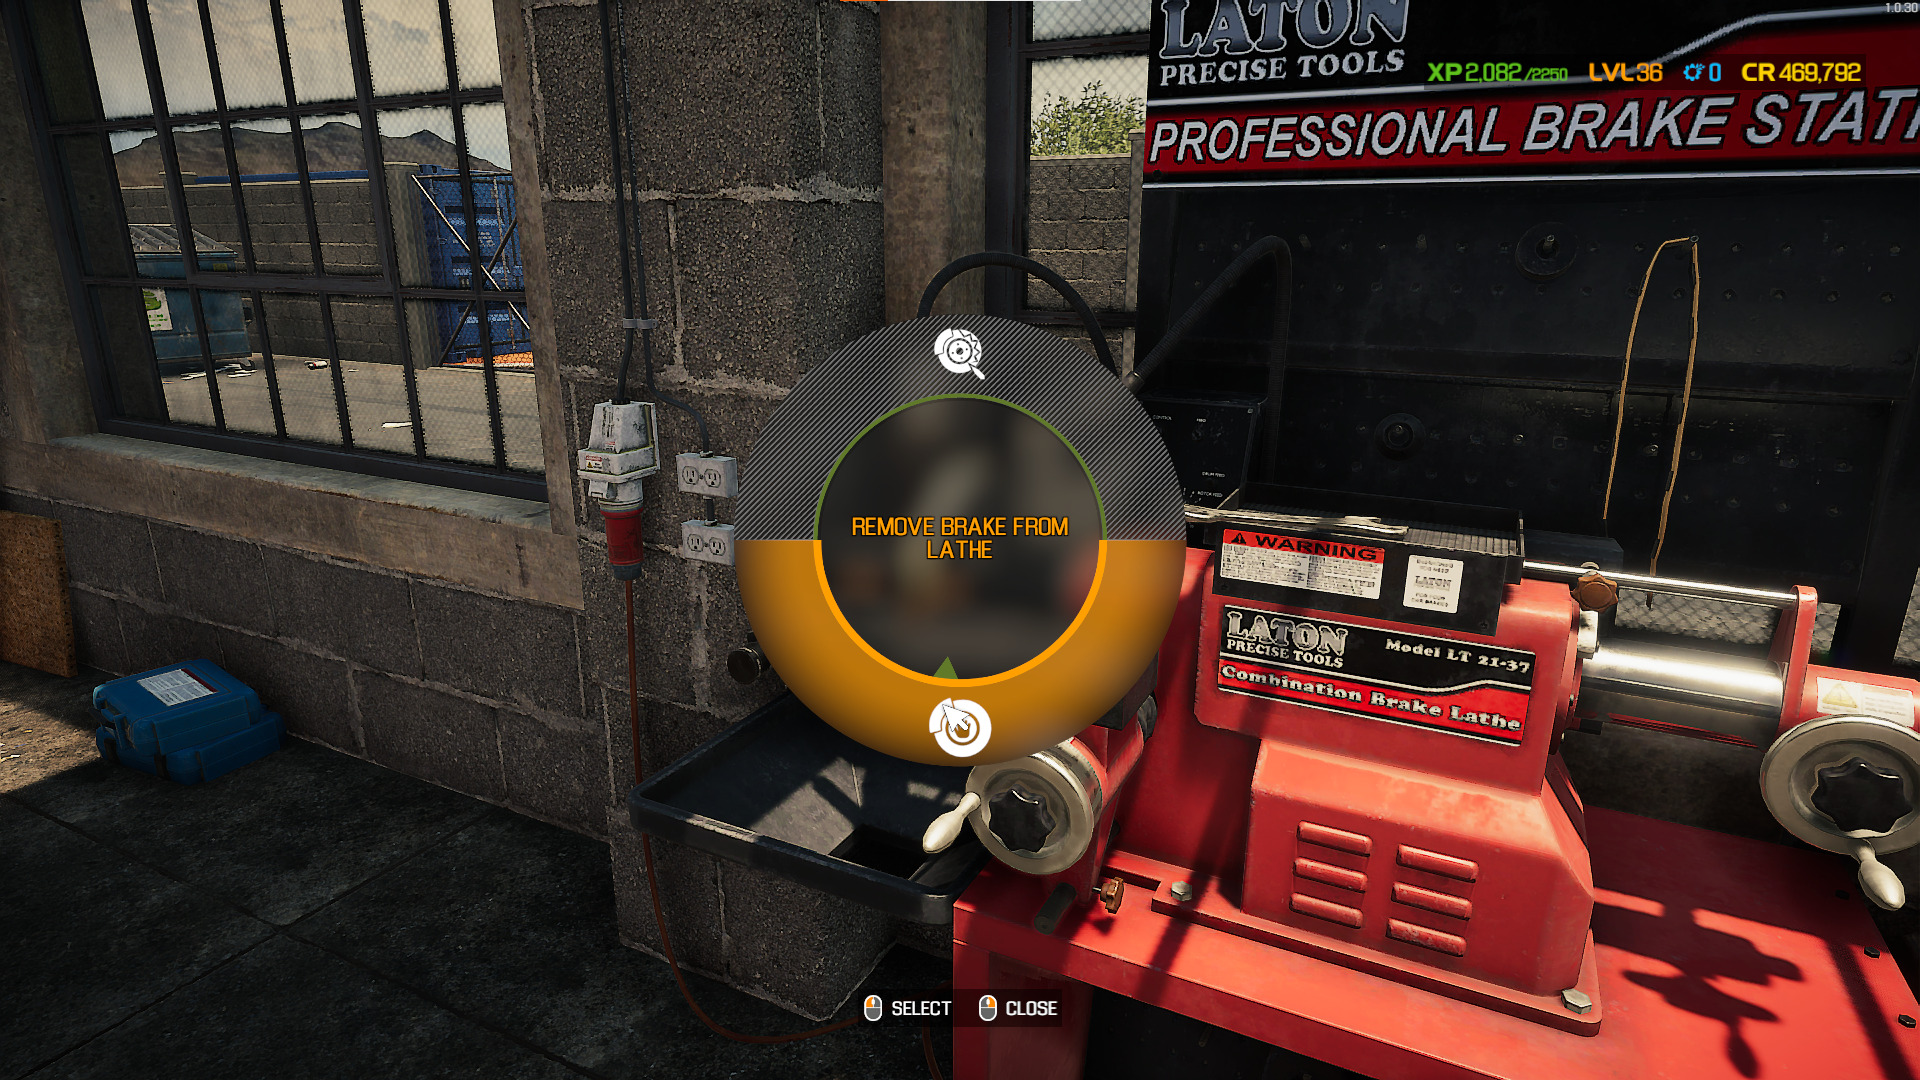 After repairing the the brake disc, remove it from the Brake Lathe machine in Car Mechanic Simulator